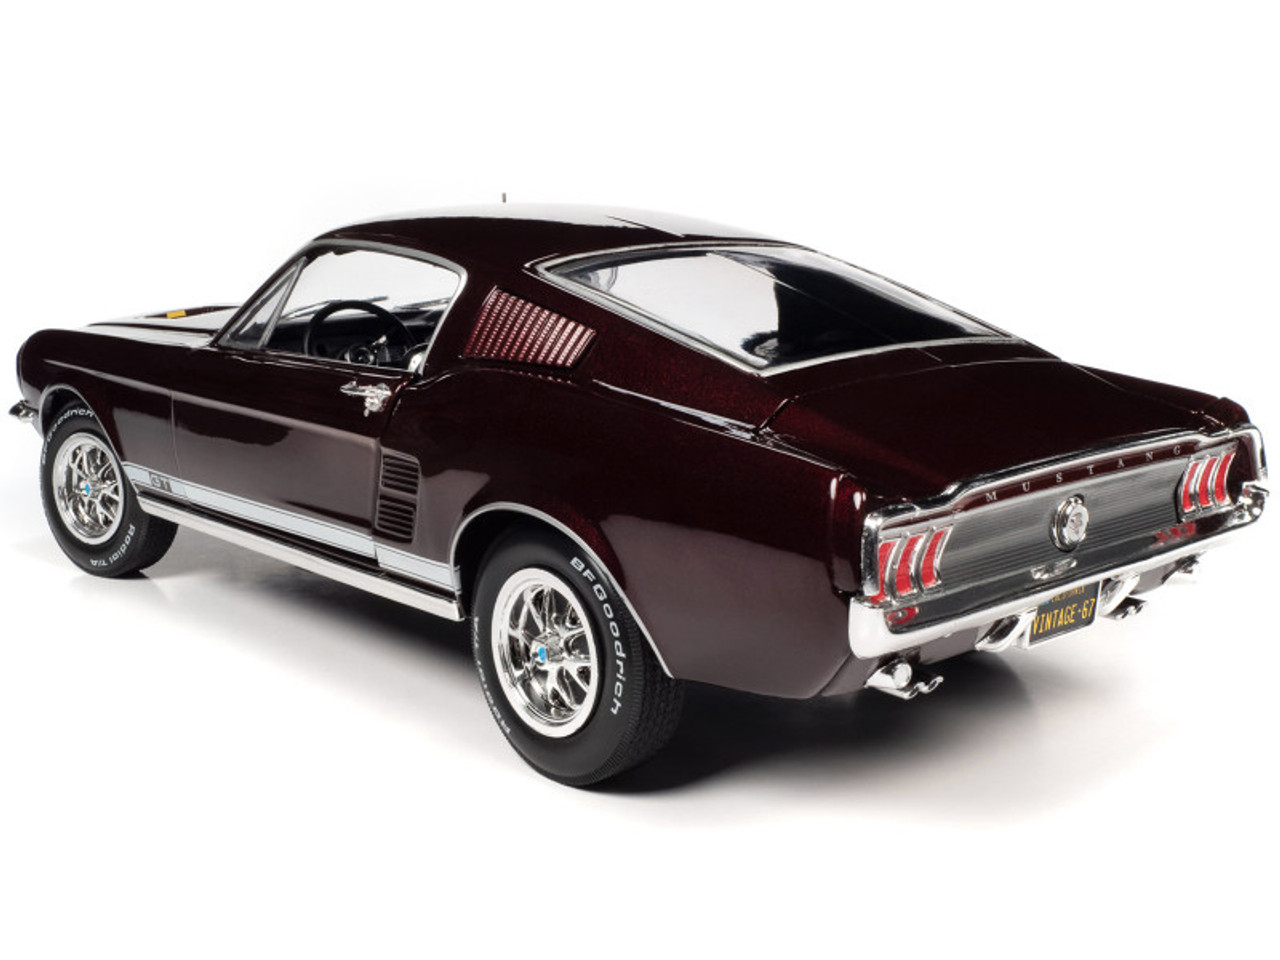 1/18 Auto World 1967 Ford Mustang GT 2+2 Burgundy Metallic with White Side Stripes Diecast Car Model